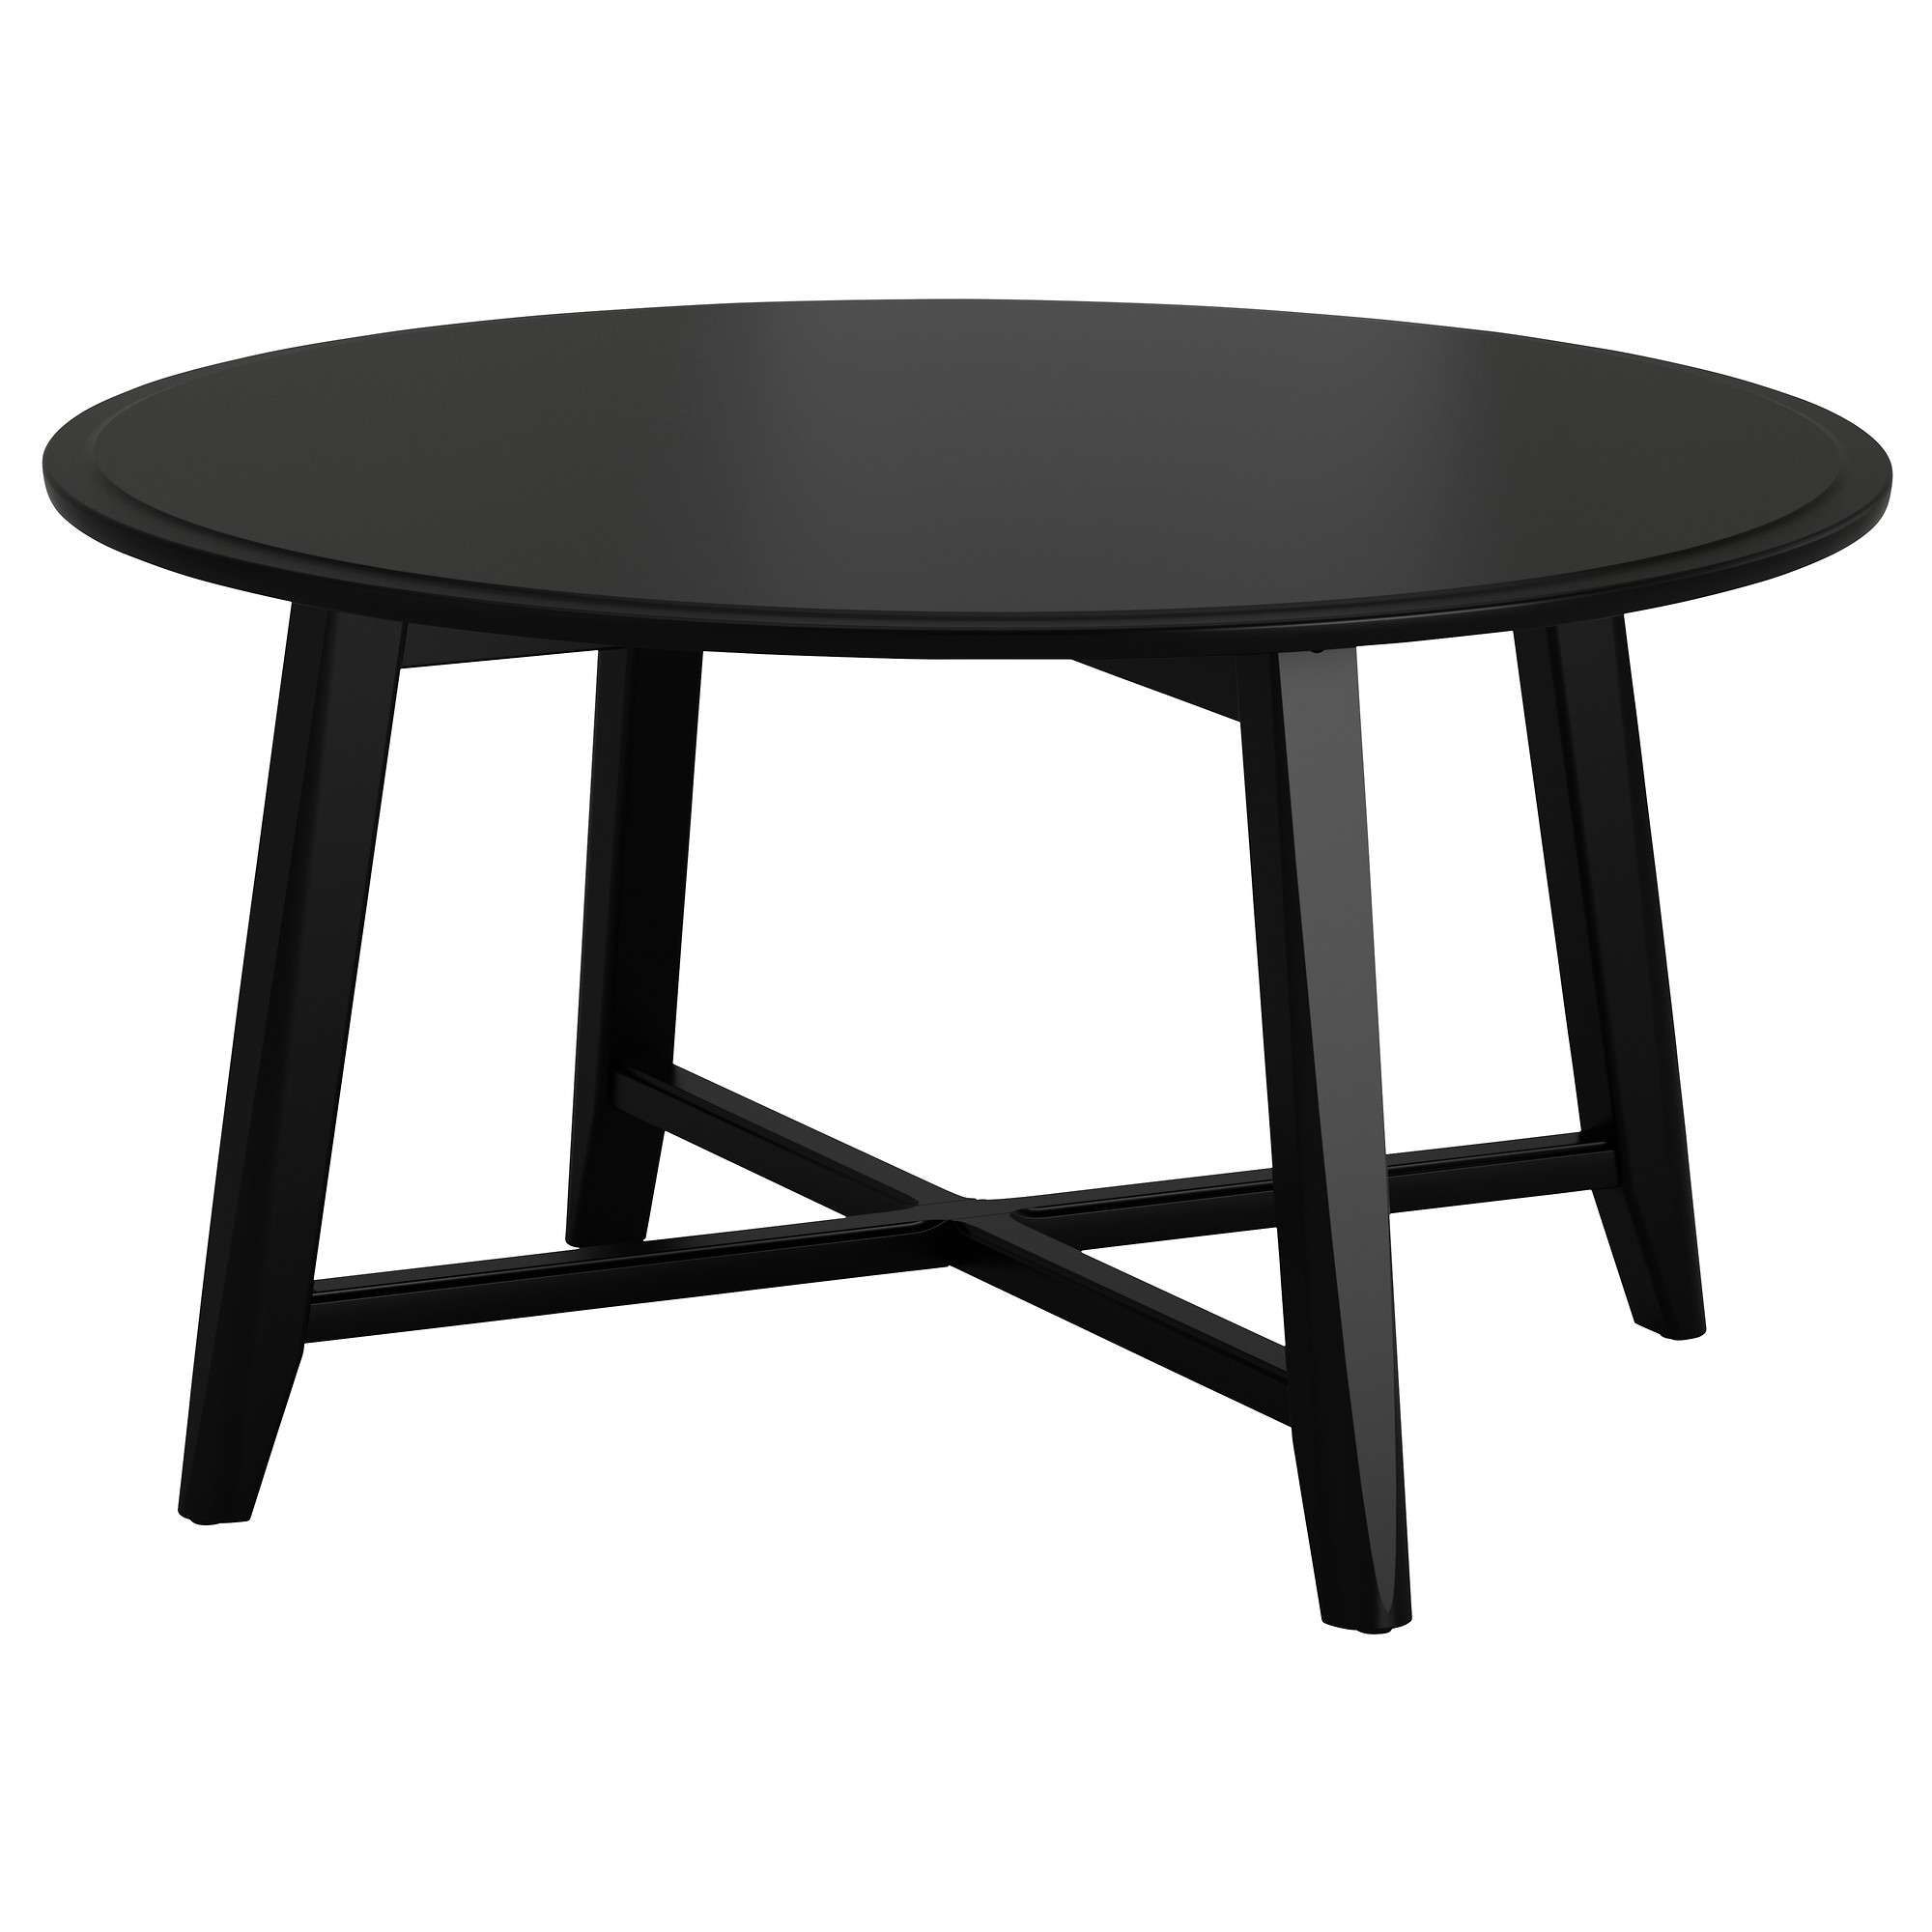 Fashionable Black Coffee Tables With Kragsta Coffee Table – Black – Ikea (View 15 of 20)